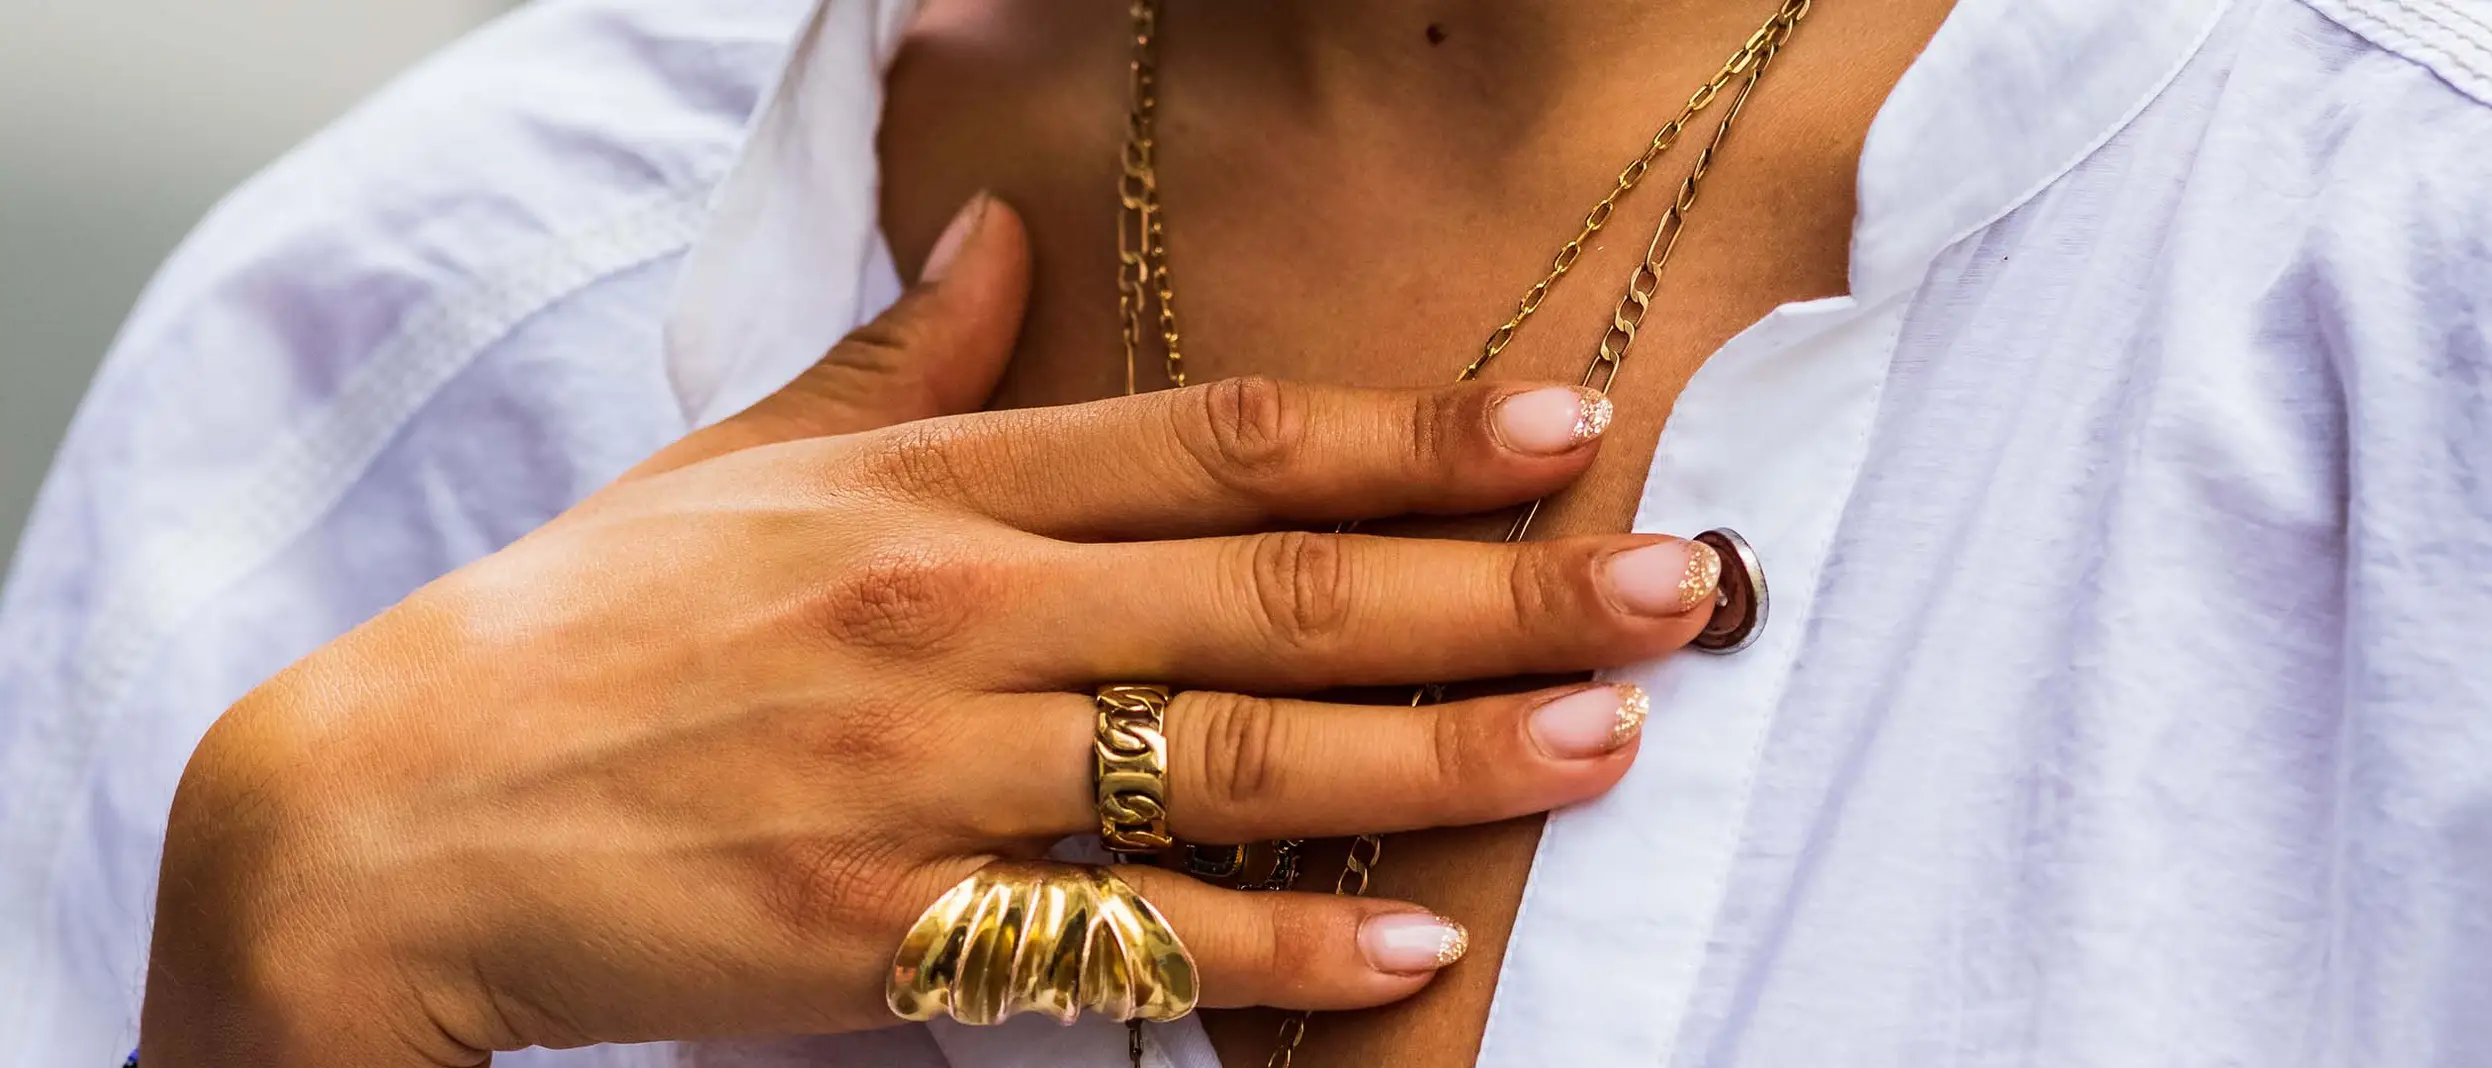 woman-with-rings-bracelets-necklaces.jpg